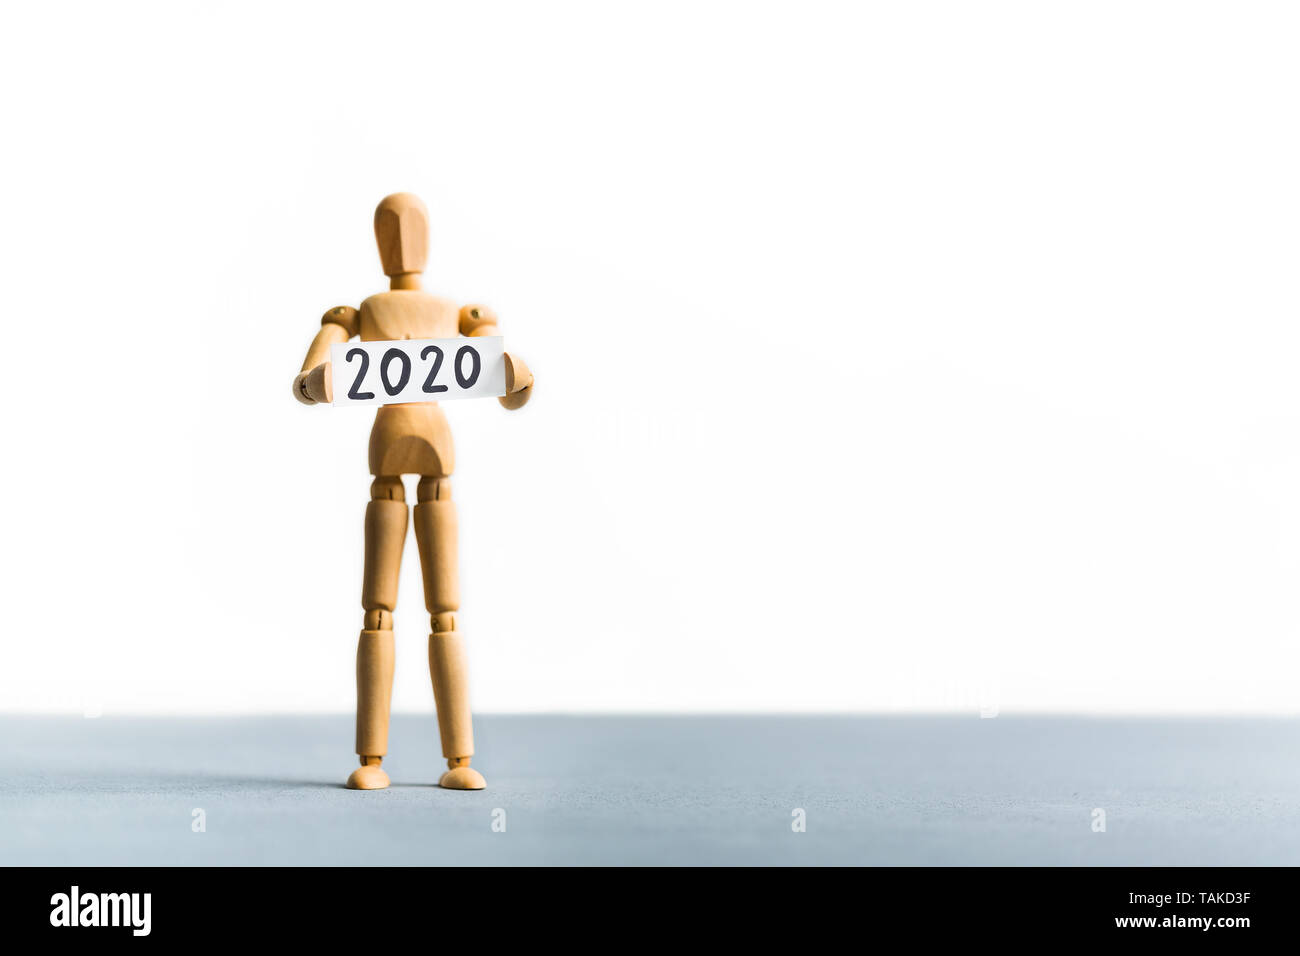 Wooden mannequin holding 2020 year sign in hands Stock Photo